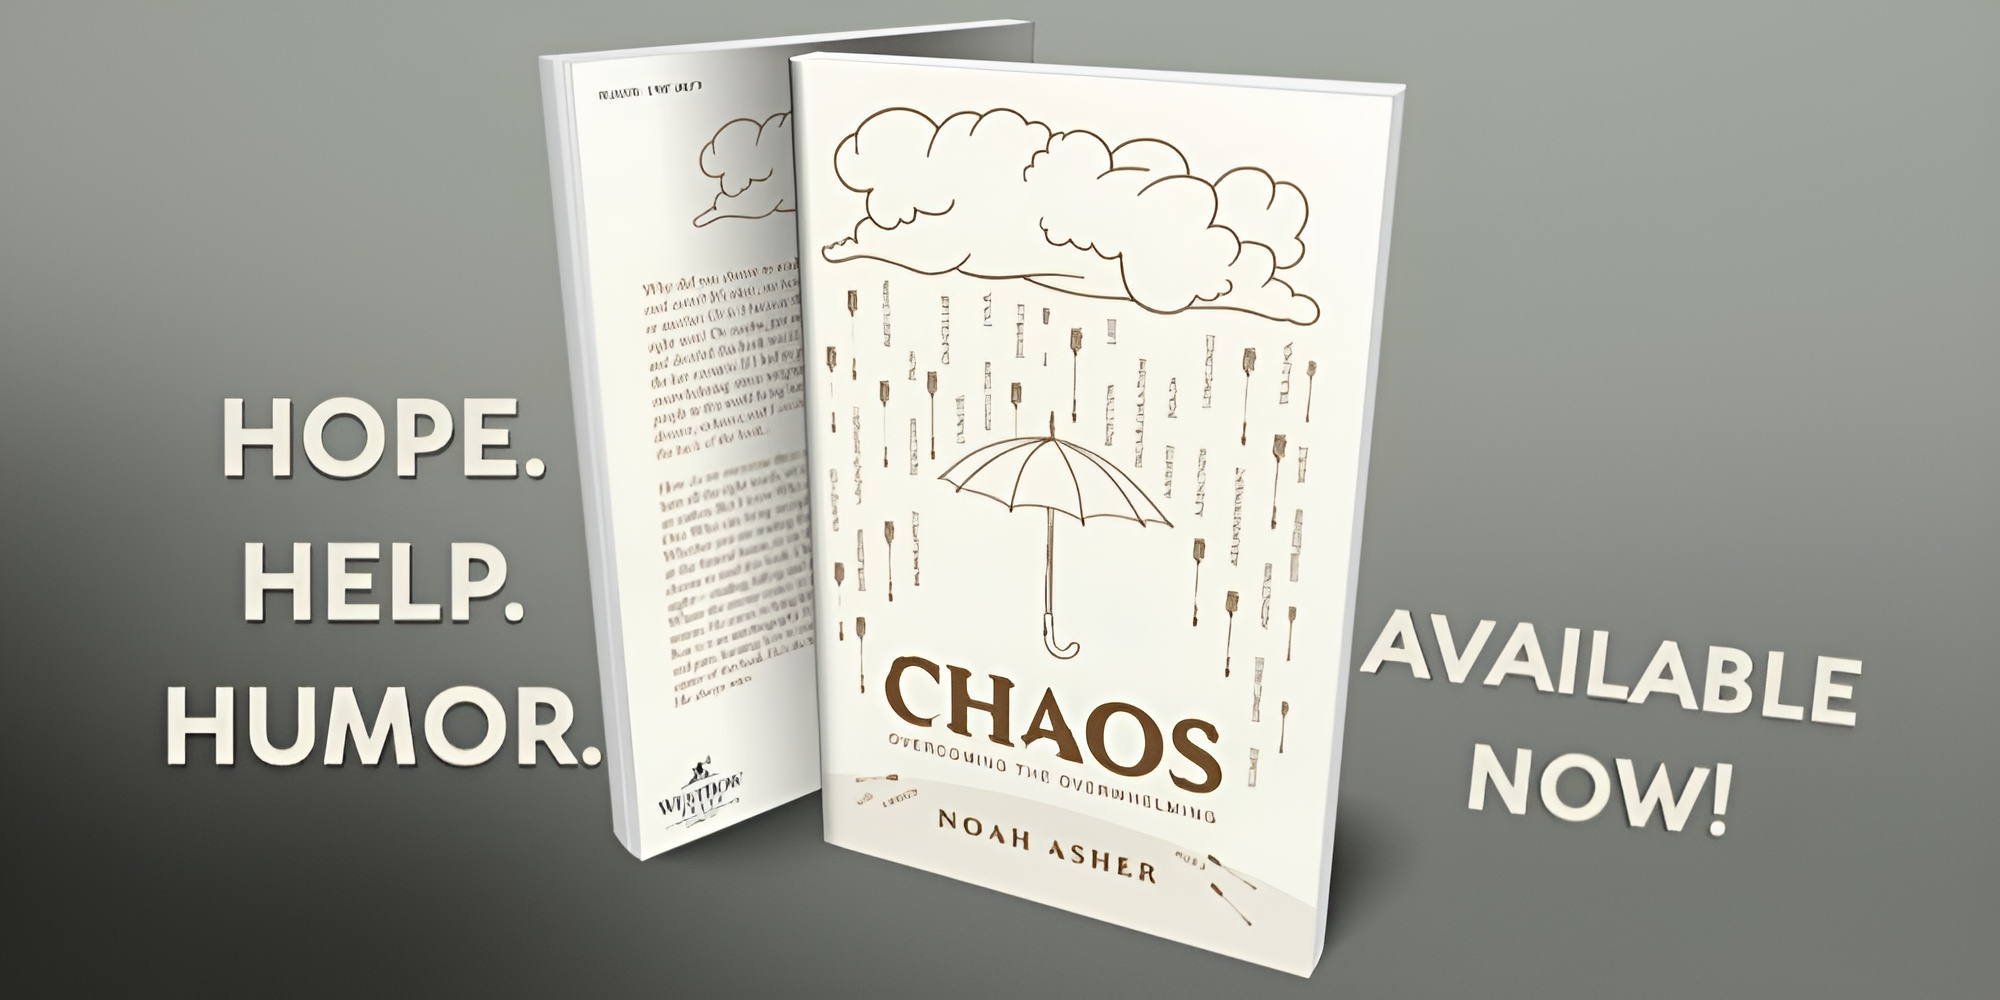 Meet Noah Asher, Author of CHAOS: Overcoming the Overwhelming